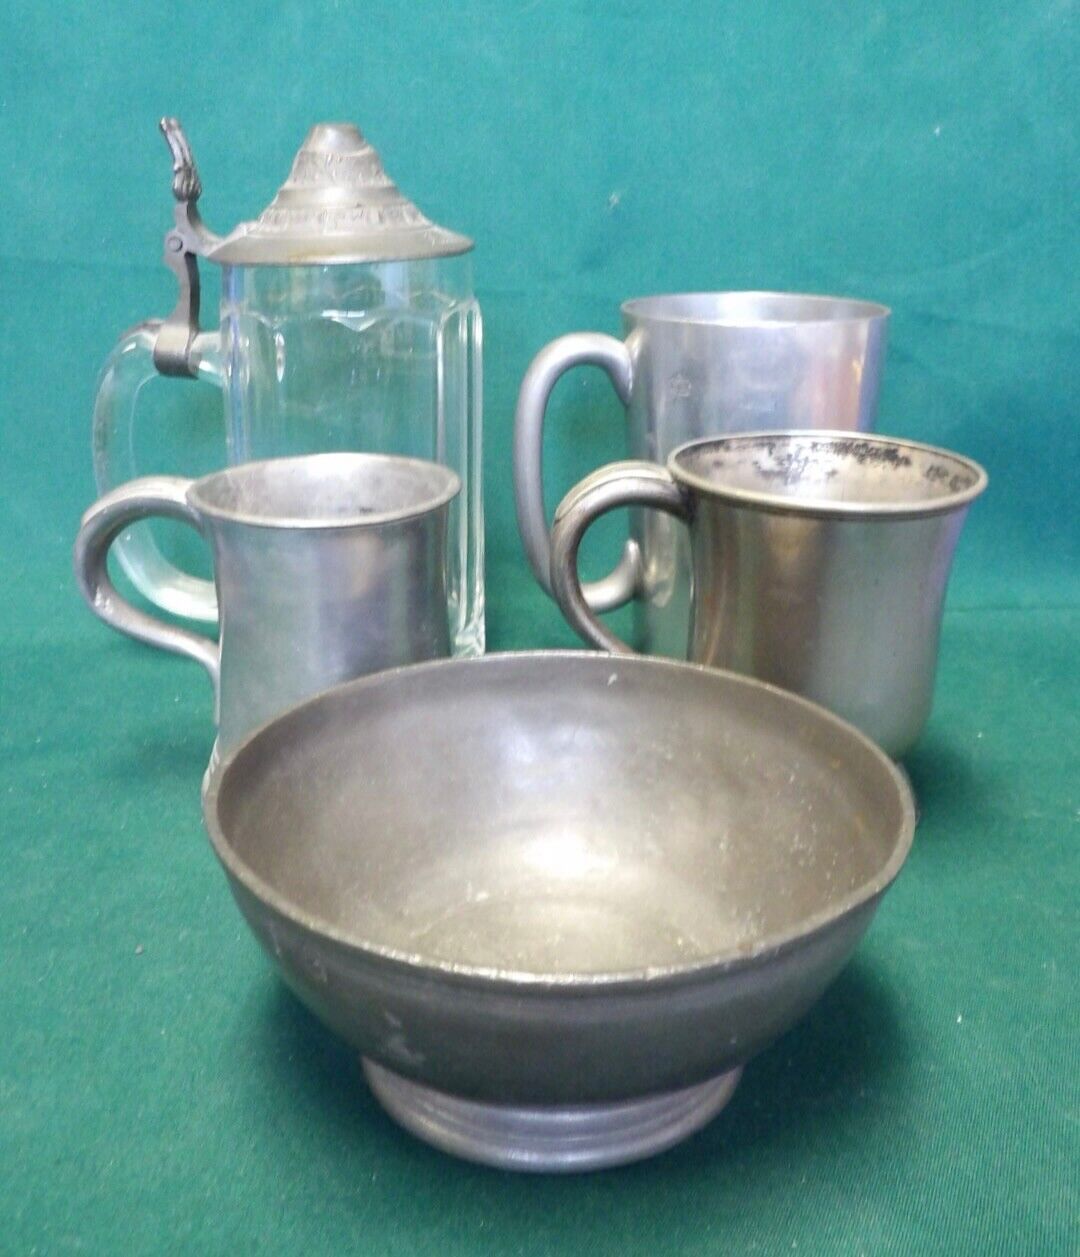 Mixed Five Piece Lot of Antique 19th Century Pewter #15